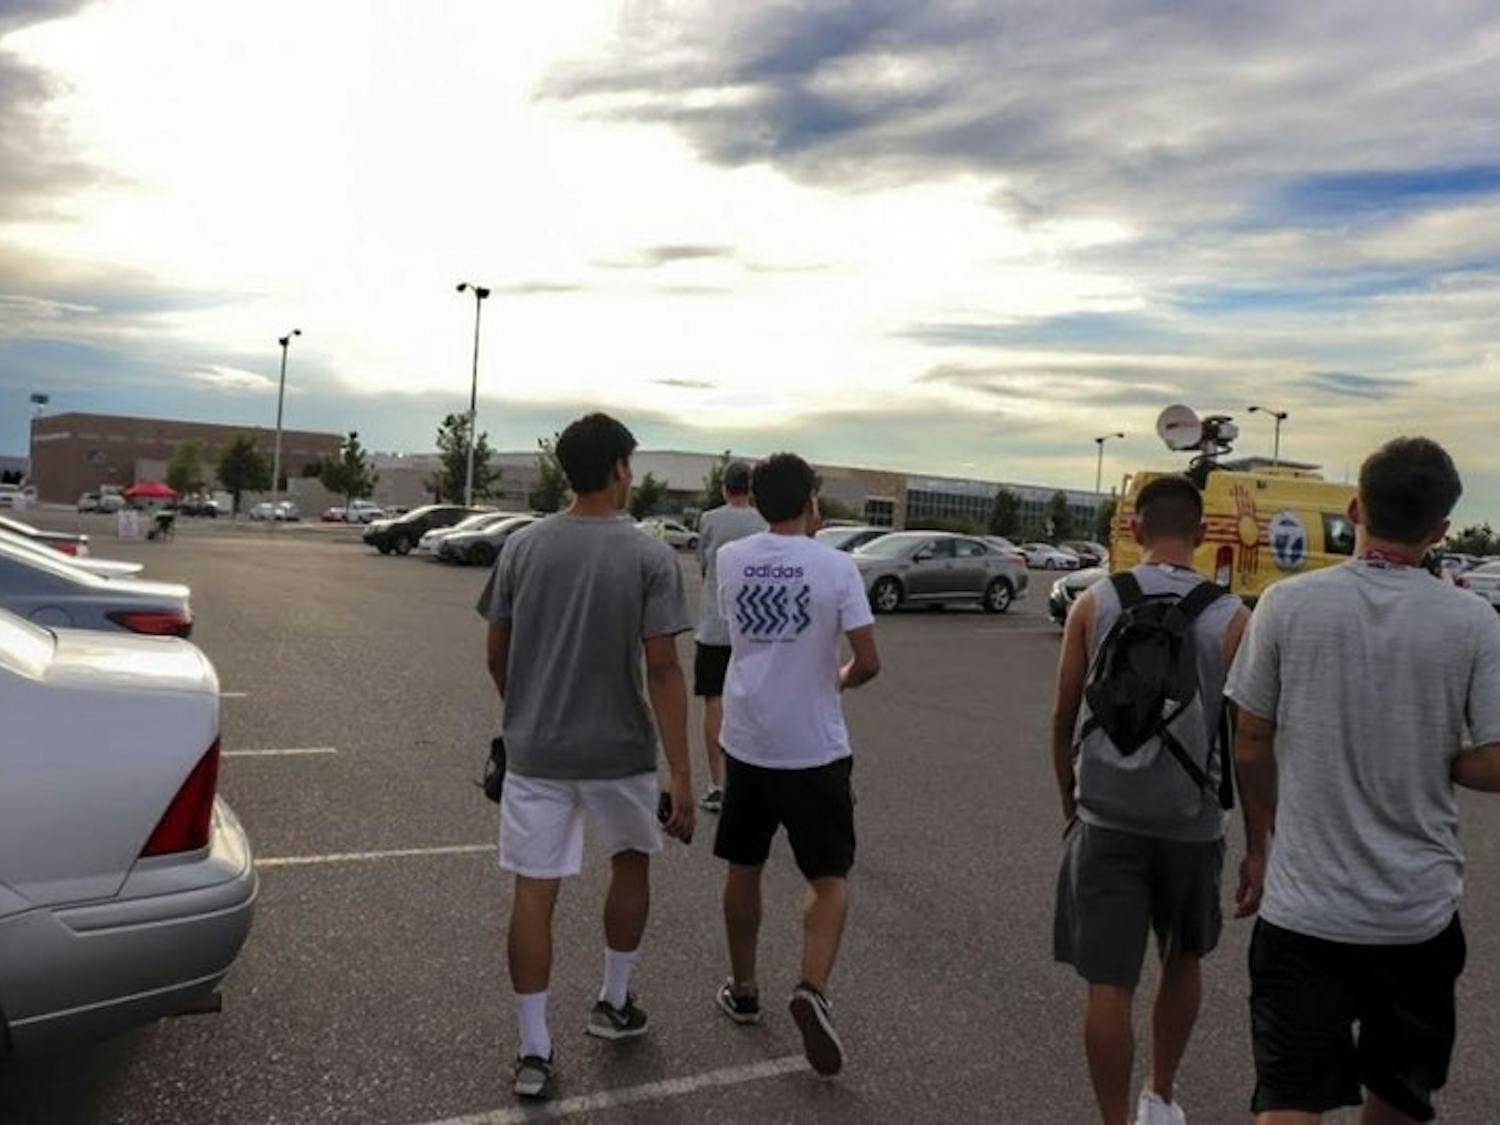 Members of the men's soccer team walk out of the Colleen J. Maloof Administration Building on Wednesday July 18, 2018, after being told that men's soccer was being recommended to be cut from UNM.